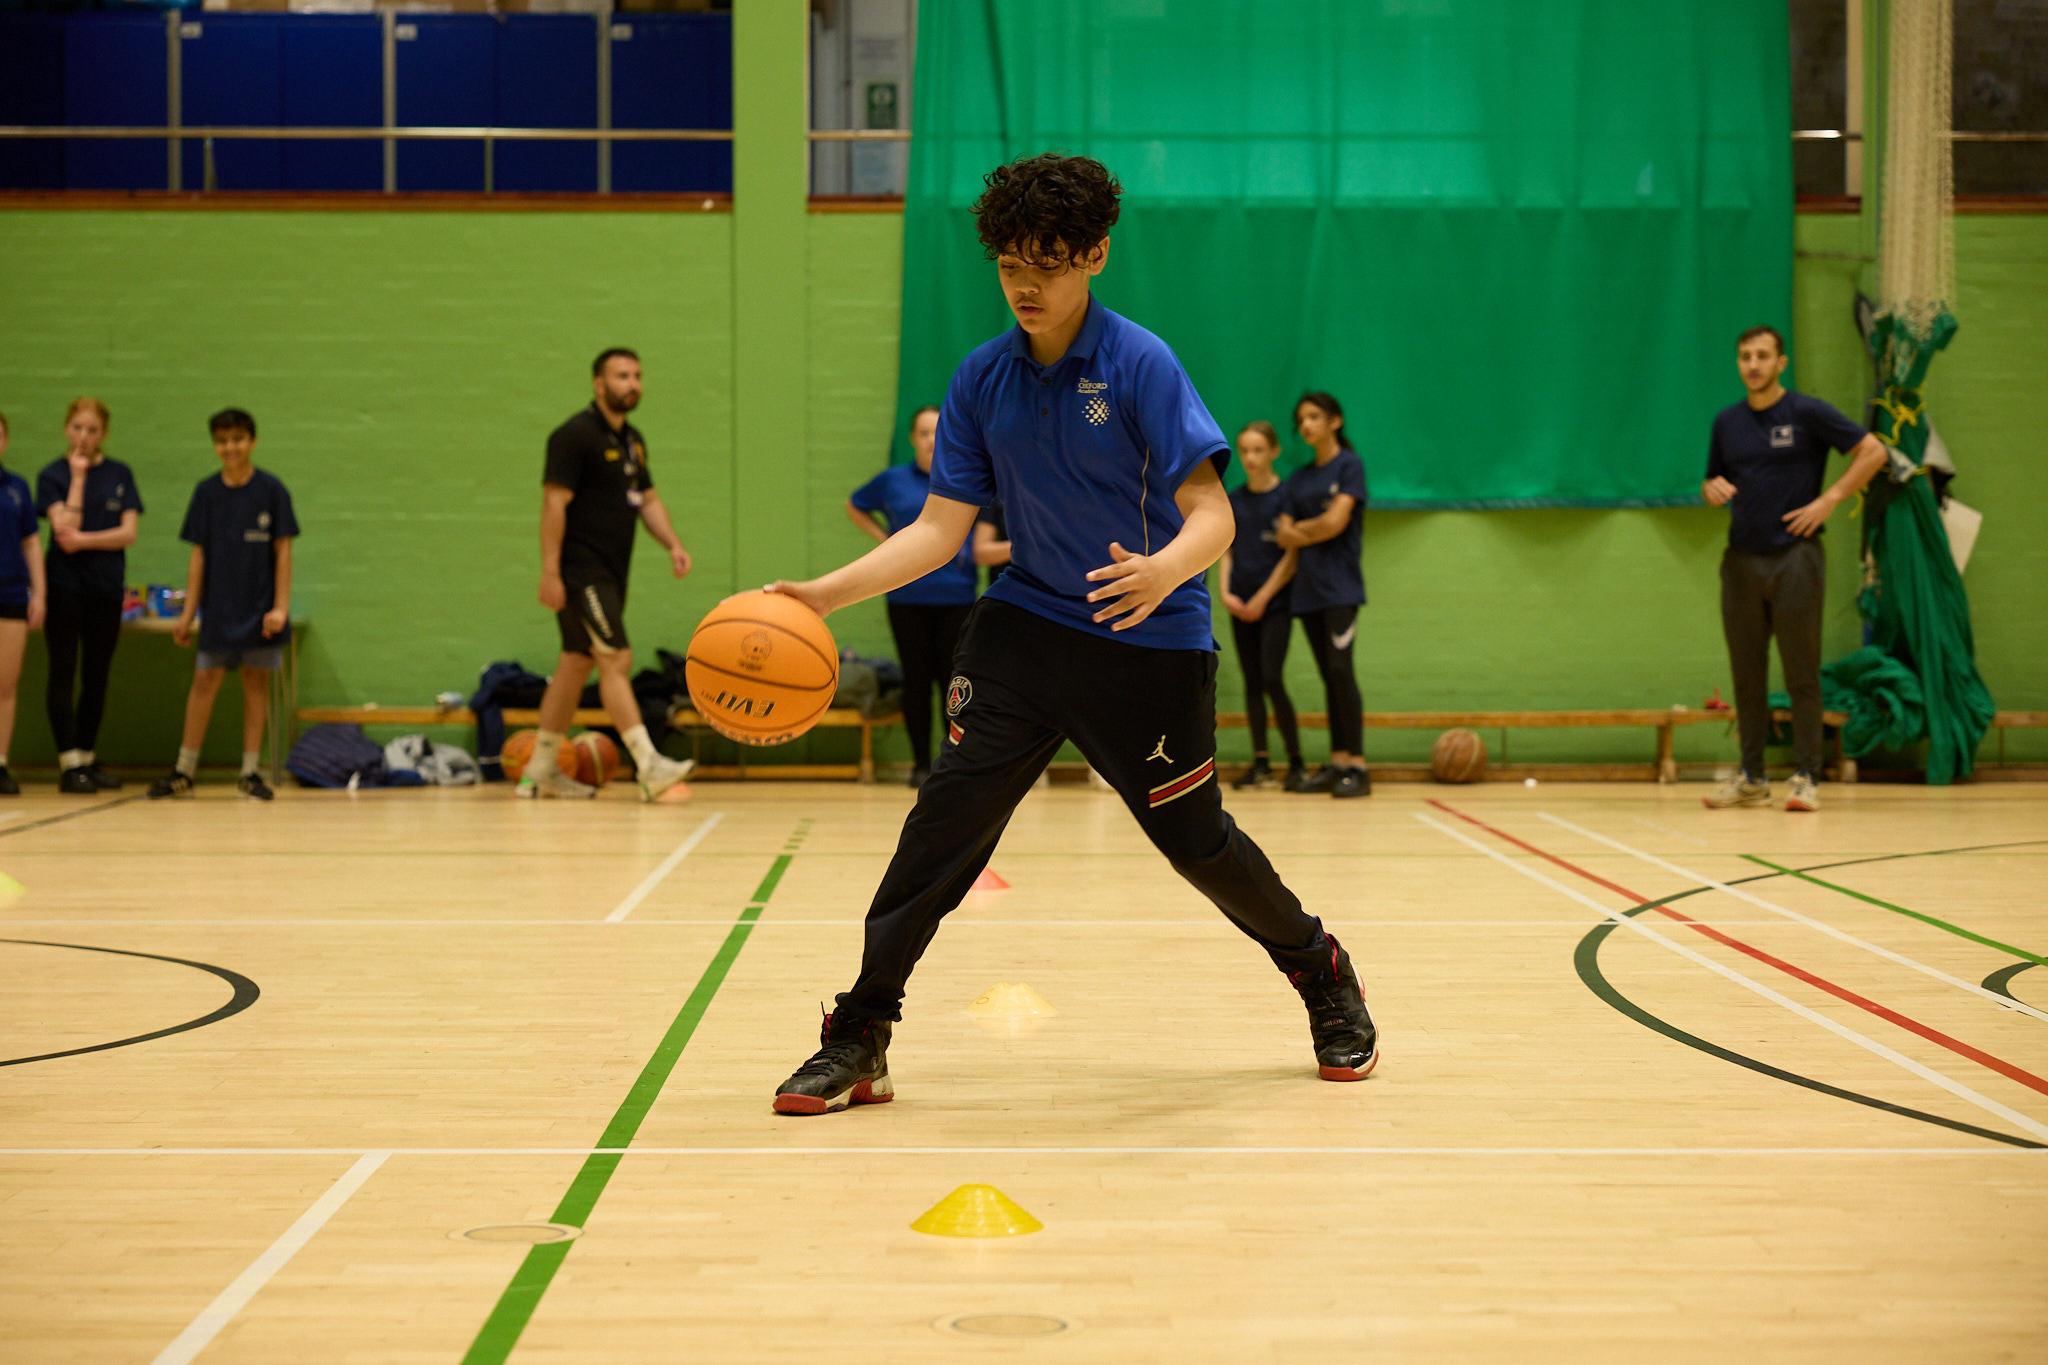 Pupil in a school hall bouncing a basketball